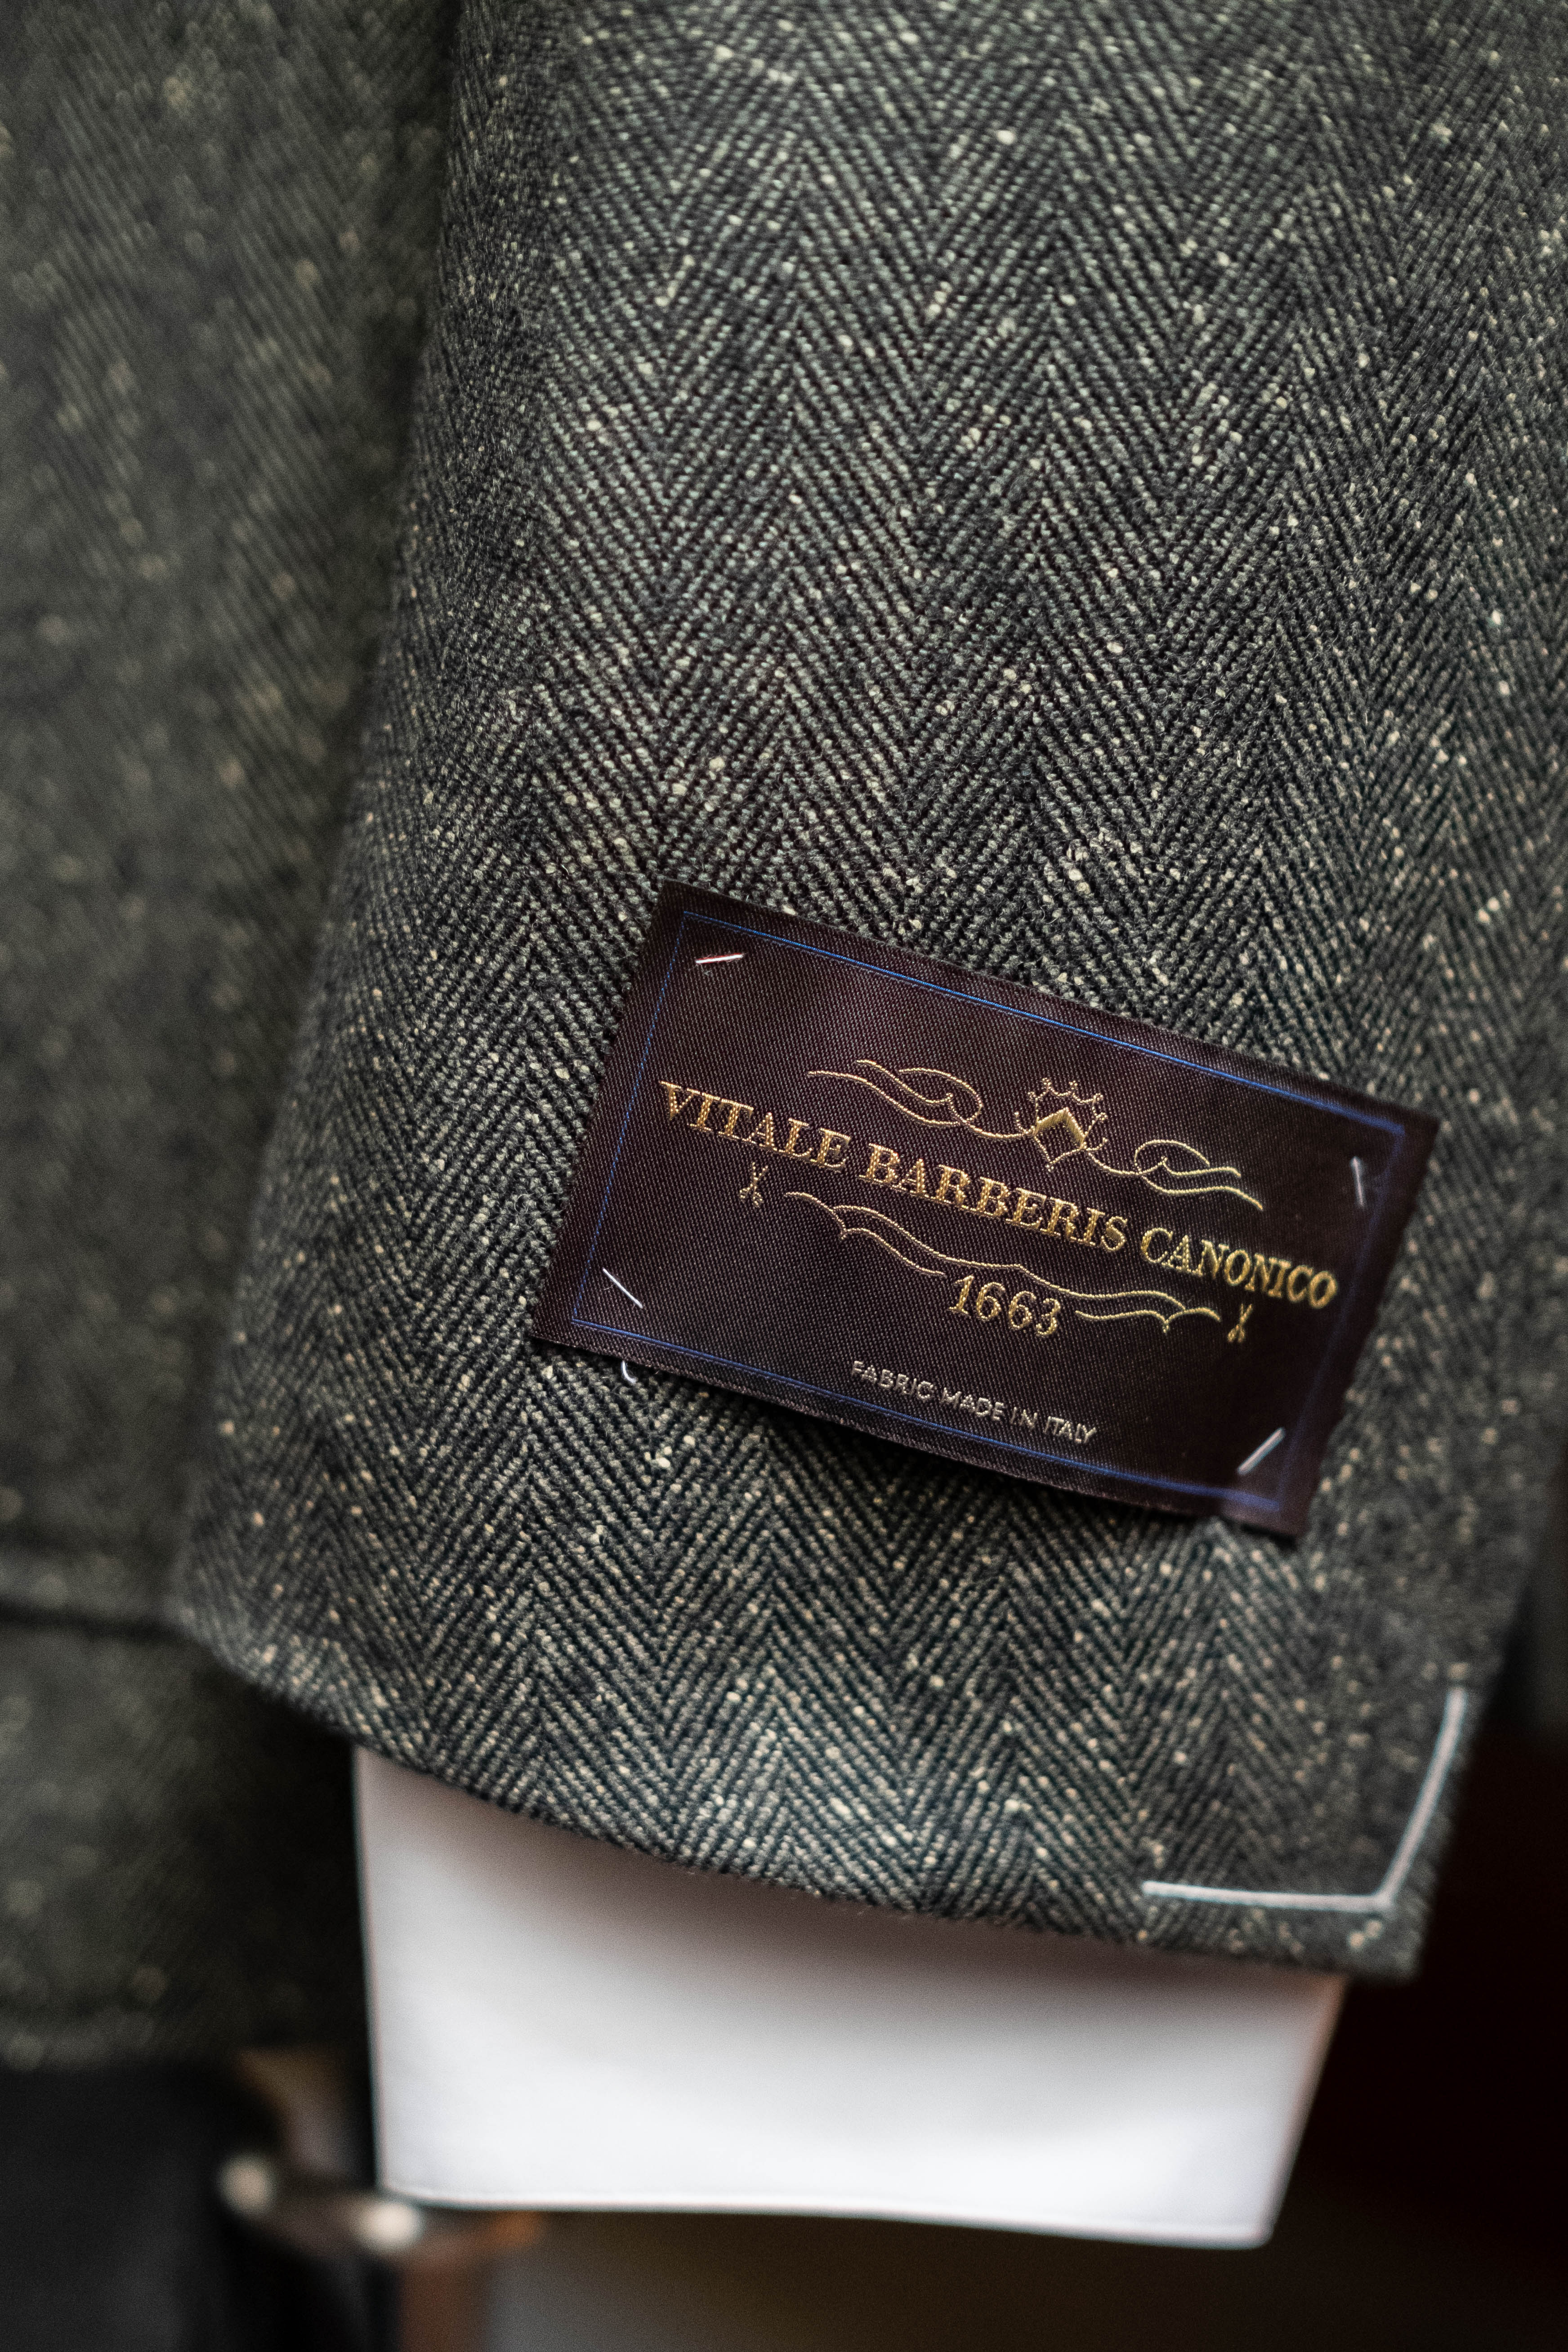 The Cloth Chronicles: Featuring Fall/Winter Tailoring